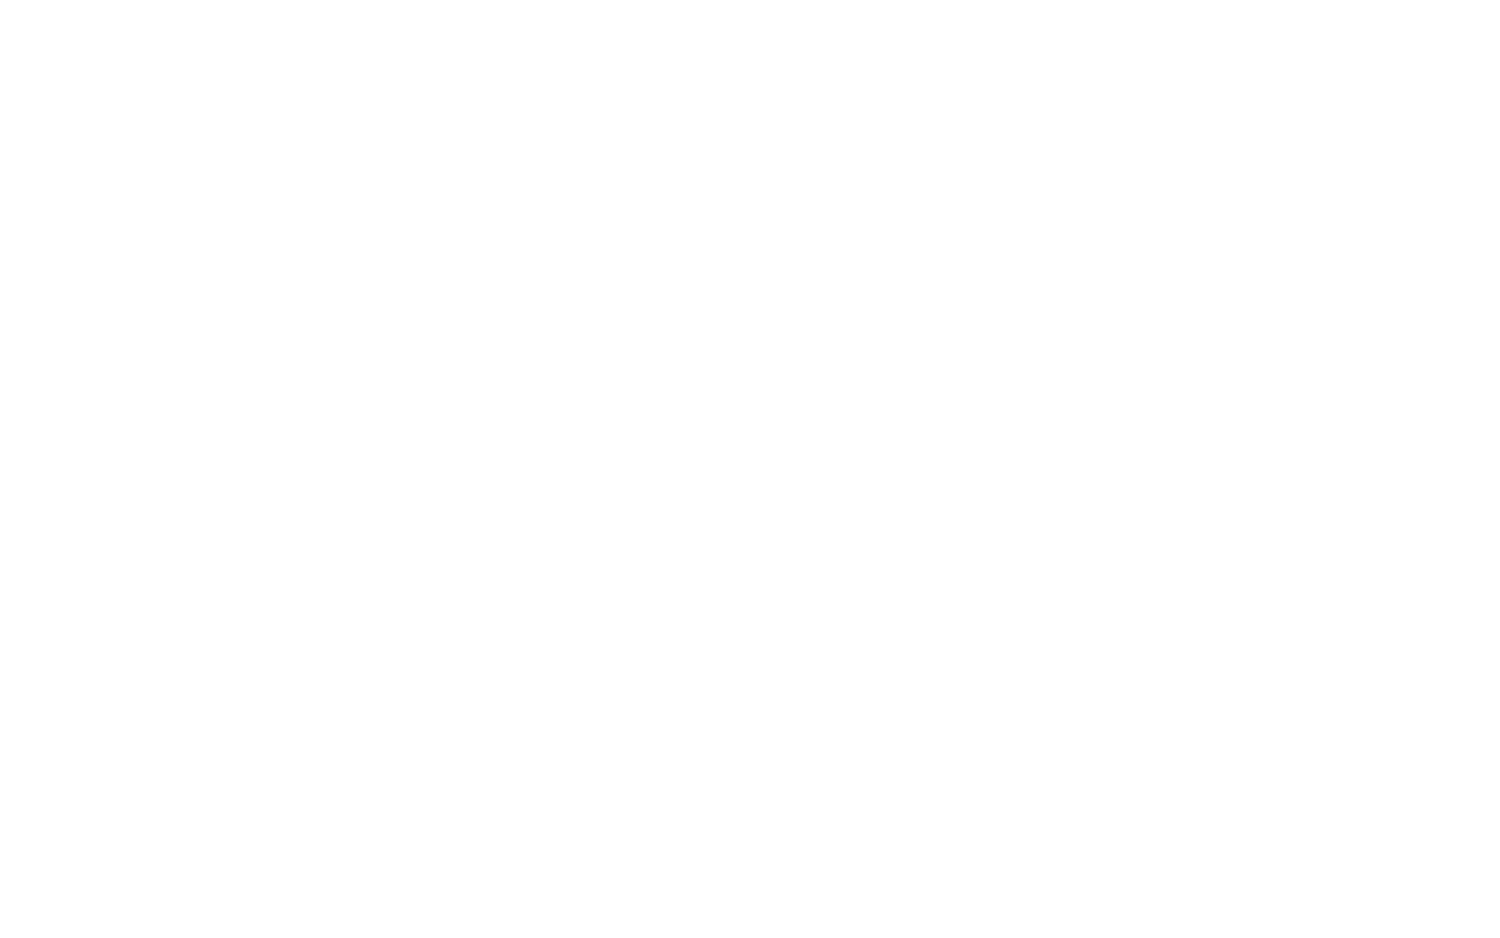 The Chris Cooke Team of Berkshire Hathaway Homeservices HomeSale Realty